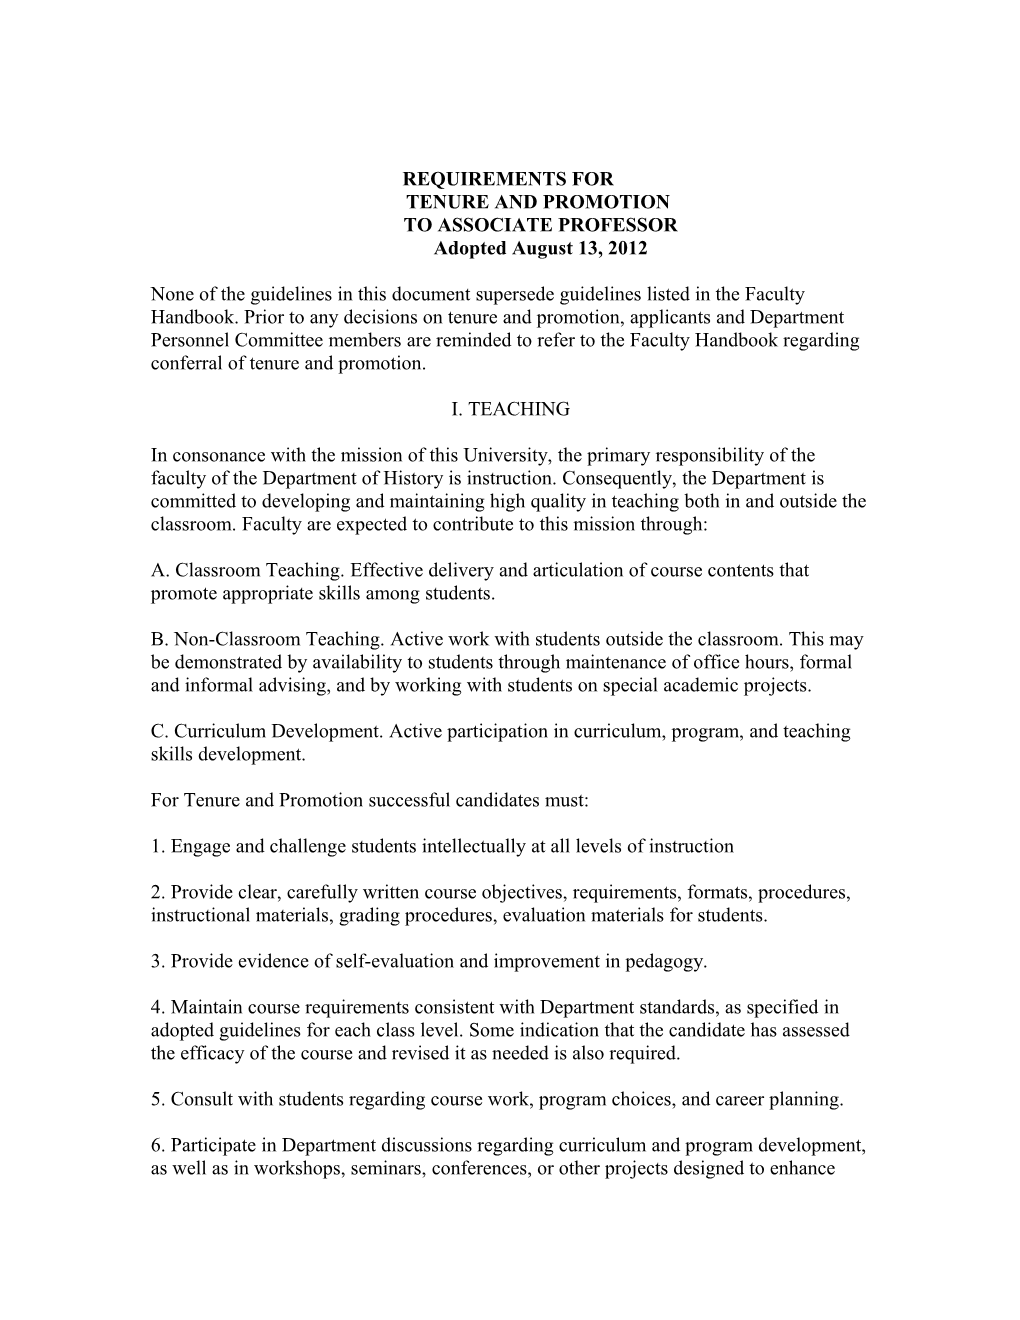 REQUIREMENTS for TENURE and PROMOTION to ASSOCIATE Professoradopted August 13, 2012